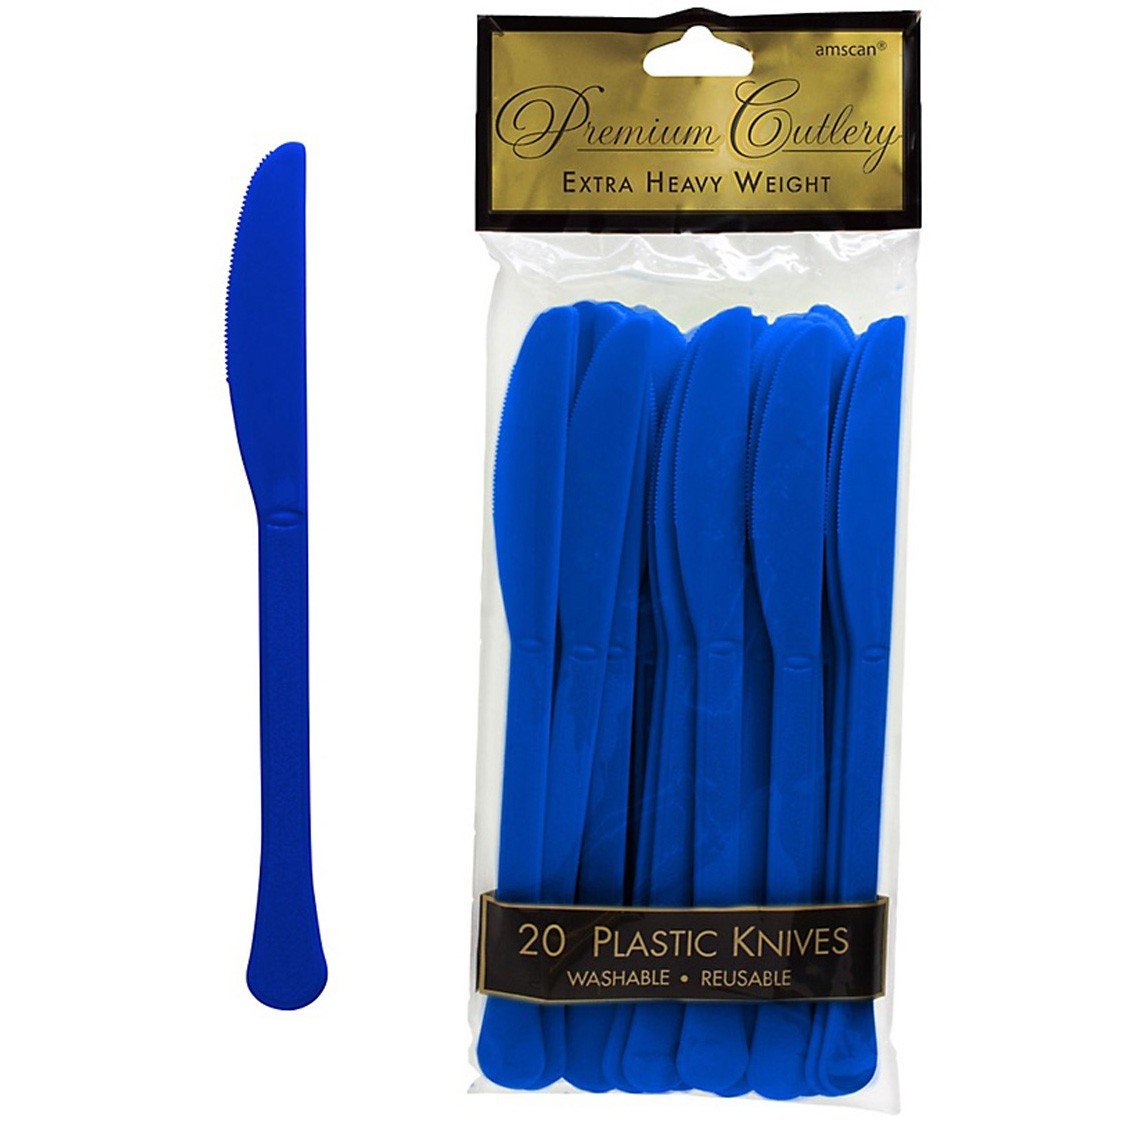 Knives Royal Blue Plastic Pk/20- Discontinued Line Last Chance To Buy